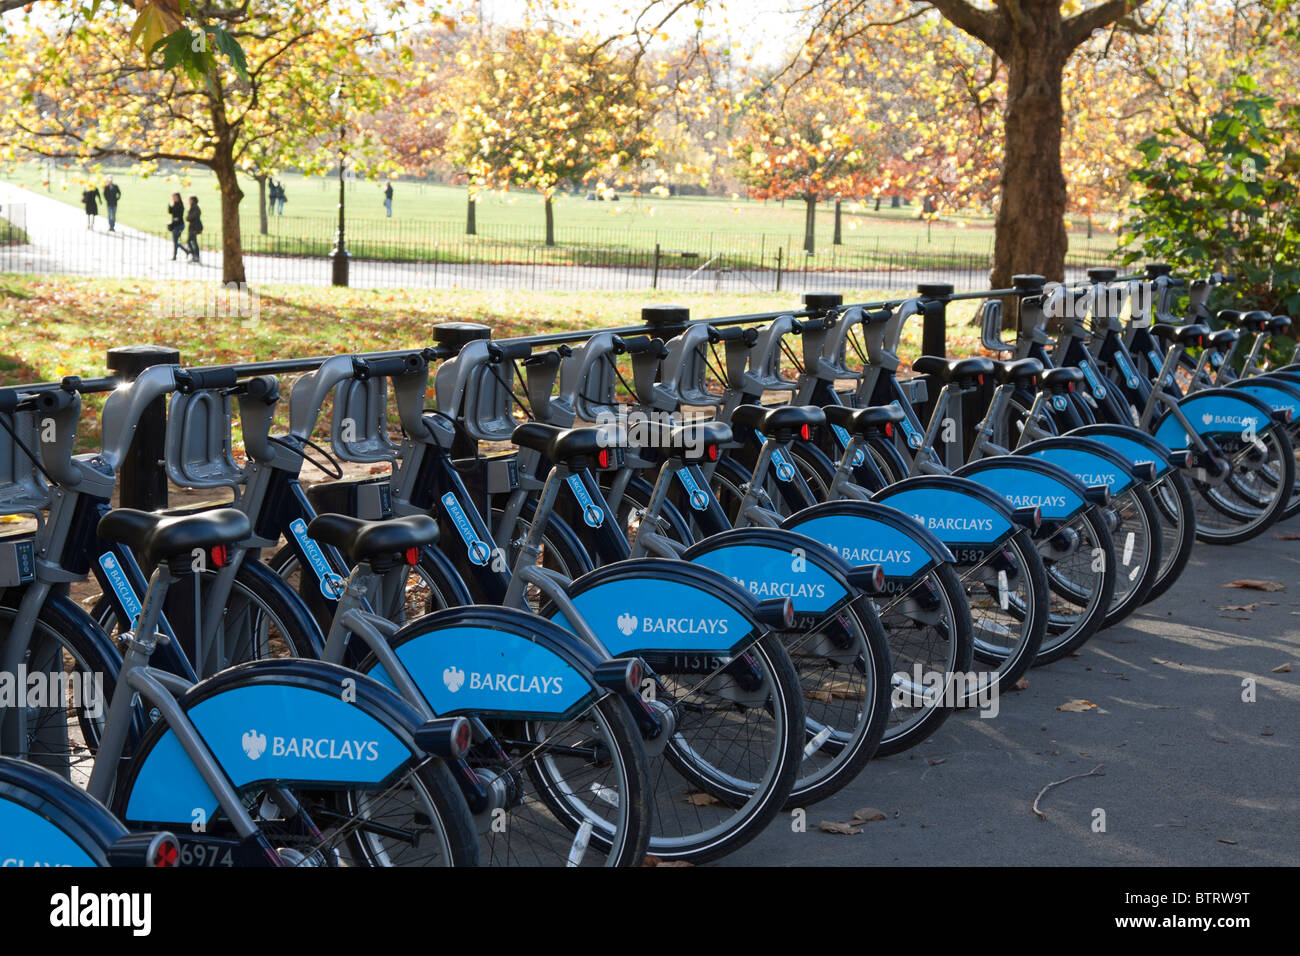 Transport For London's Barclays Cycle Hire docking bay - Hyde Park - London Stock Photo